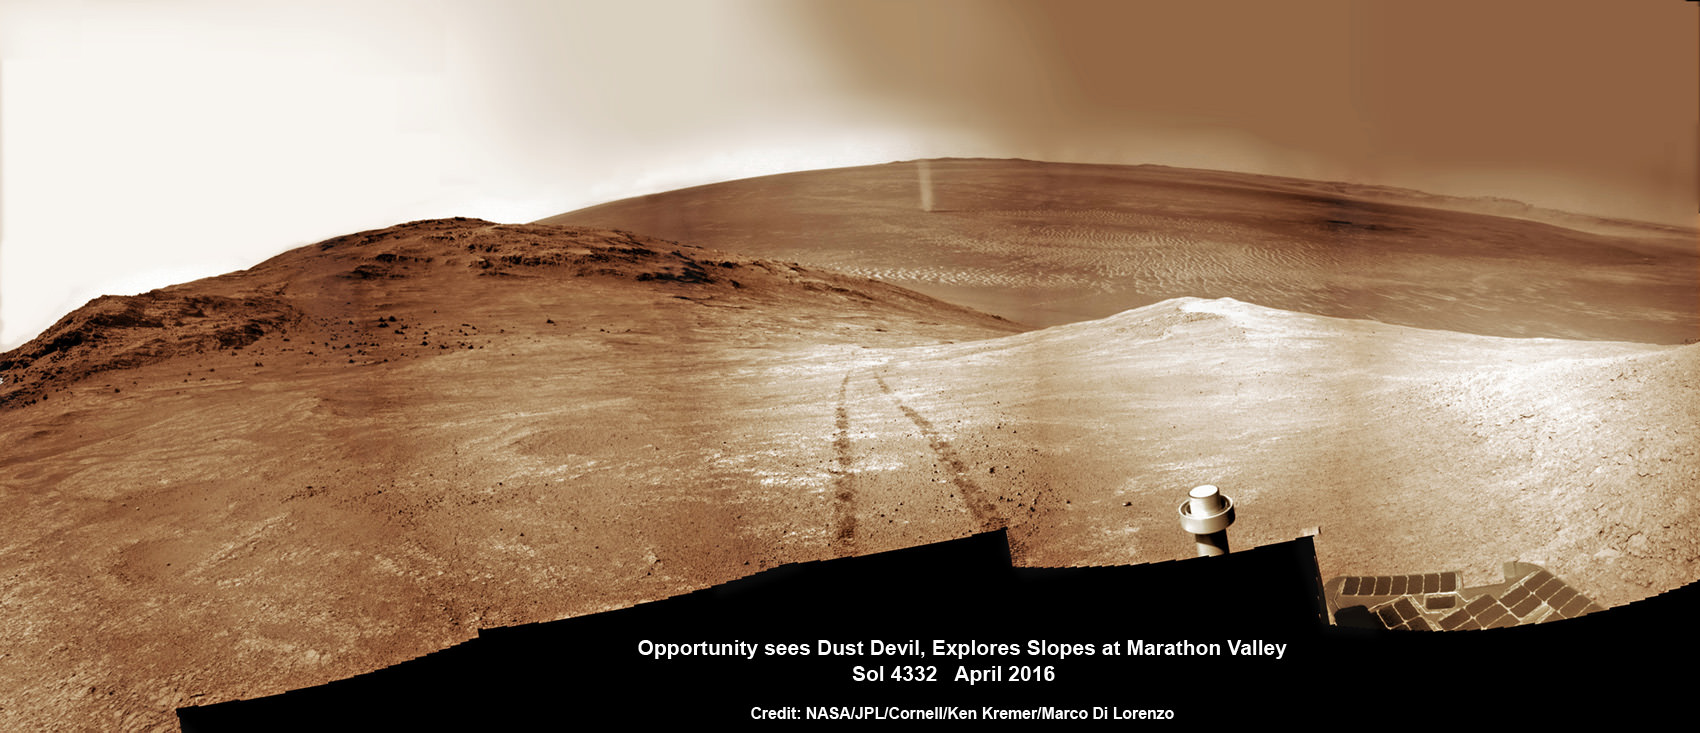 NASA’s Opportunity rover discovers a beautiful Martian dust devil moving across the floor of Endeavour crater as wheel tracks show robots path today exploring the steepest ever slopes of the 13 year long mission, in search of water altered minerals at Knudsen Ridge inside Marathon Valley on 1 April 2016. This navcam camera photo mosaic was assembled from raw images taken on Sol 4332 (1 April 2016) and colorized.  Credit: NASA/JPL/Cornell/ Ken Kremer/kenkremer.com/Marco Di Lorenzo